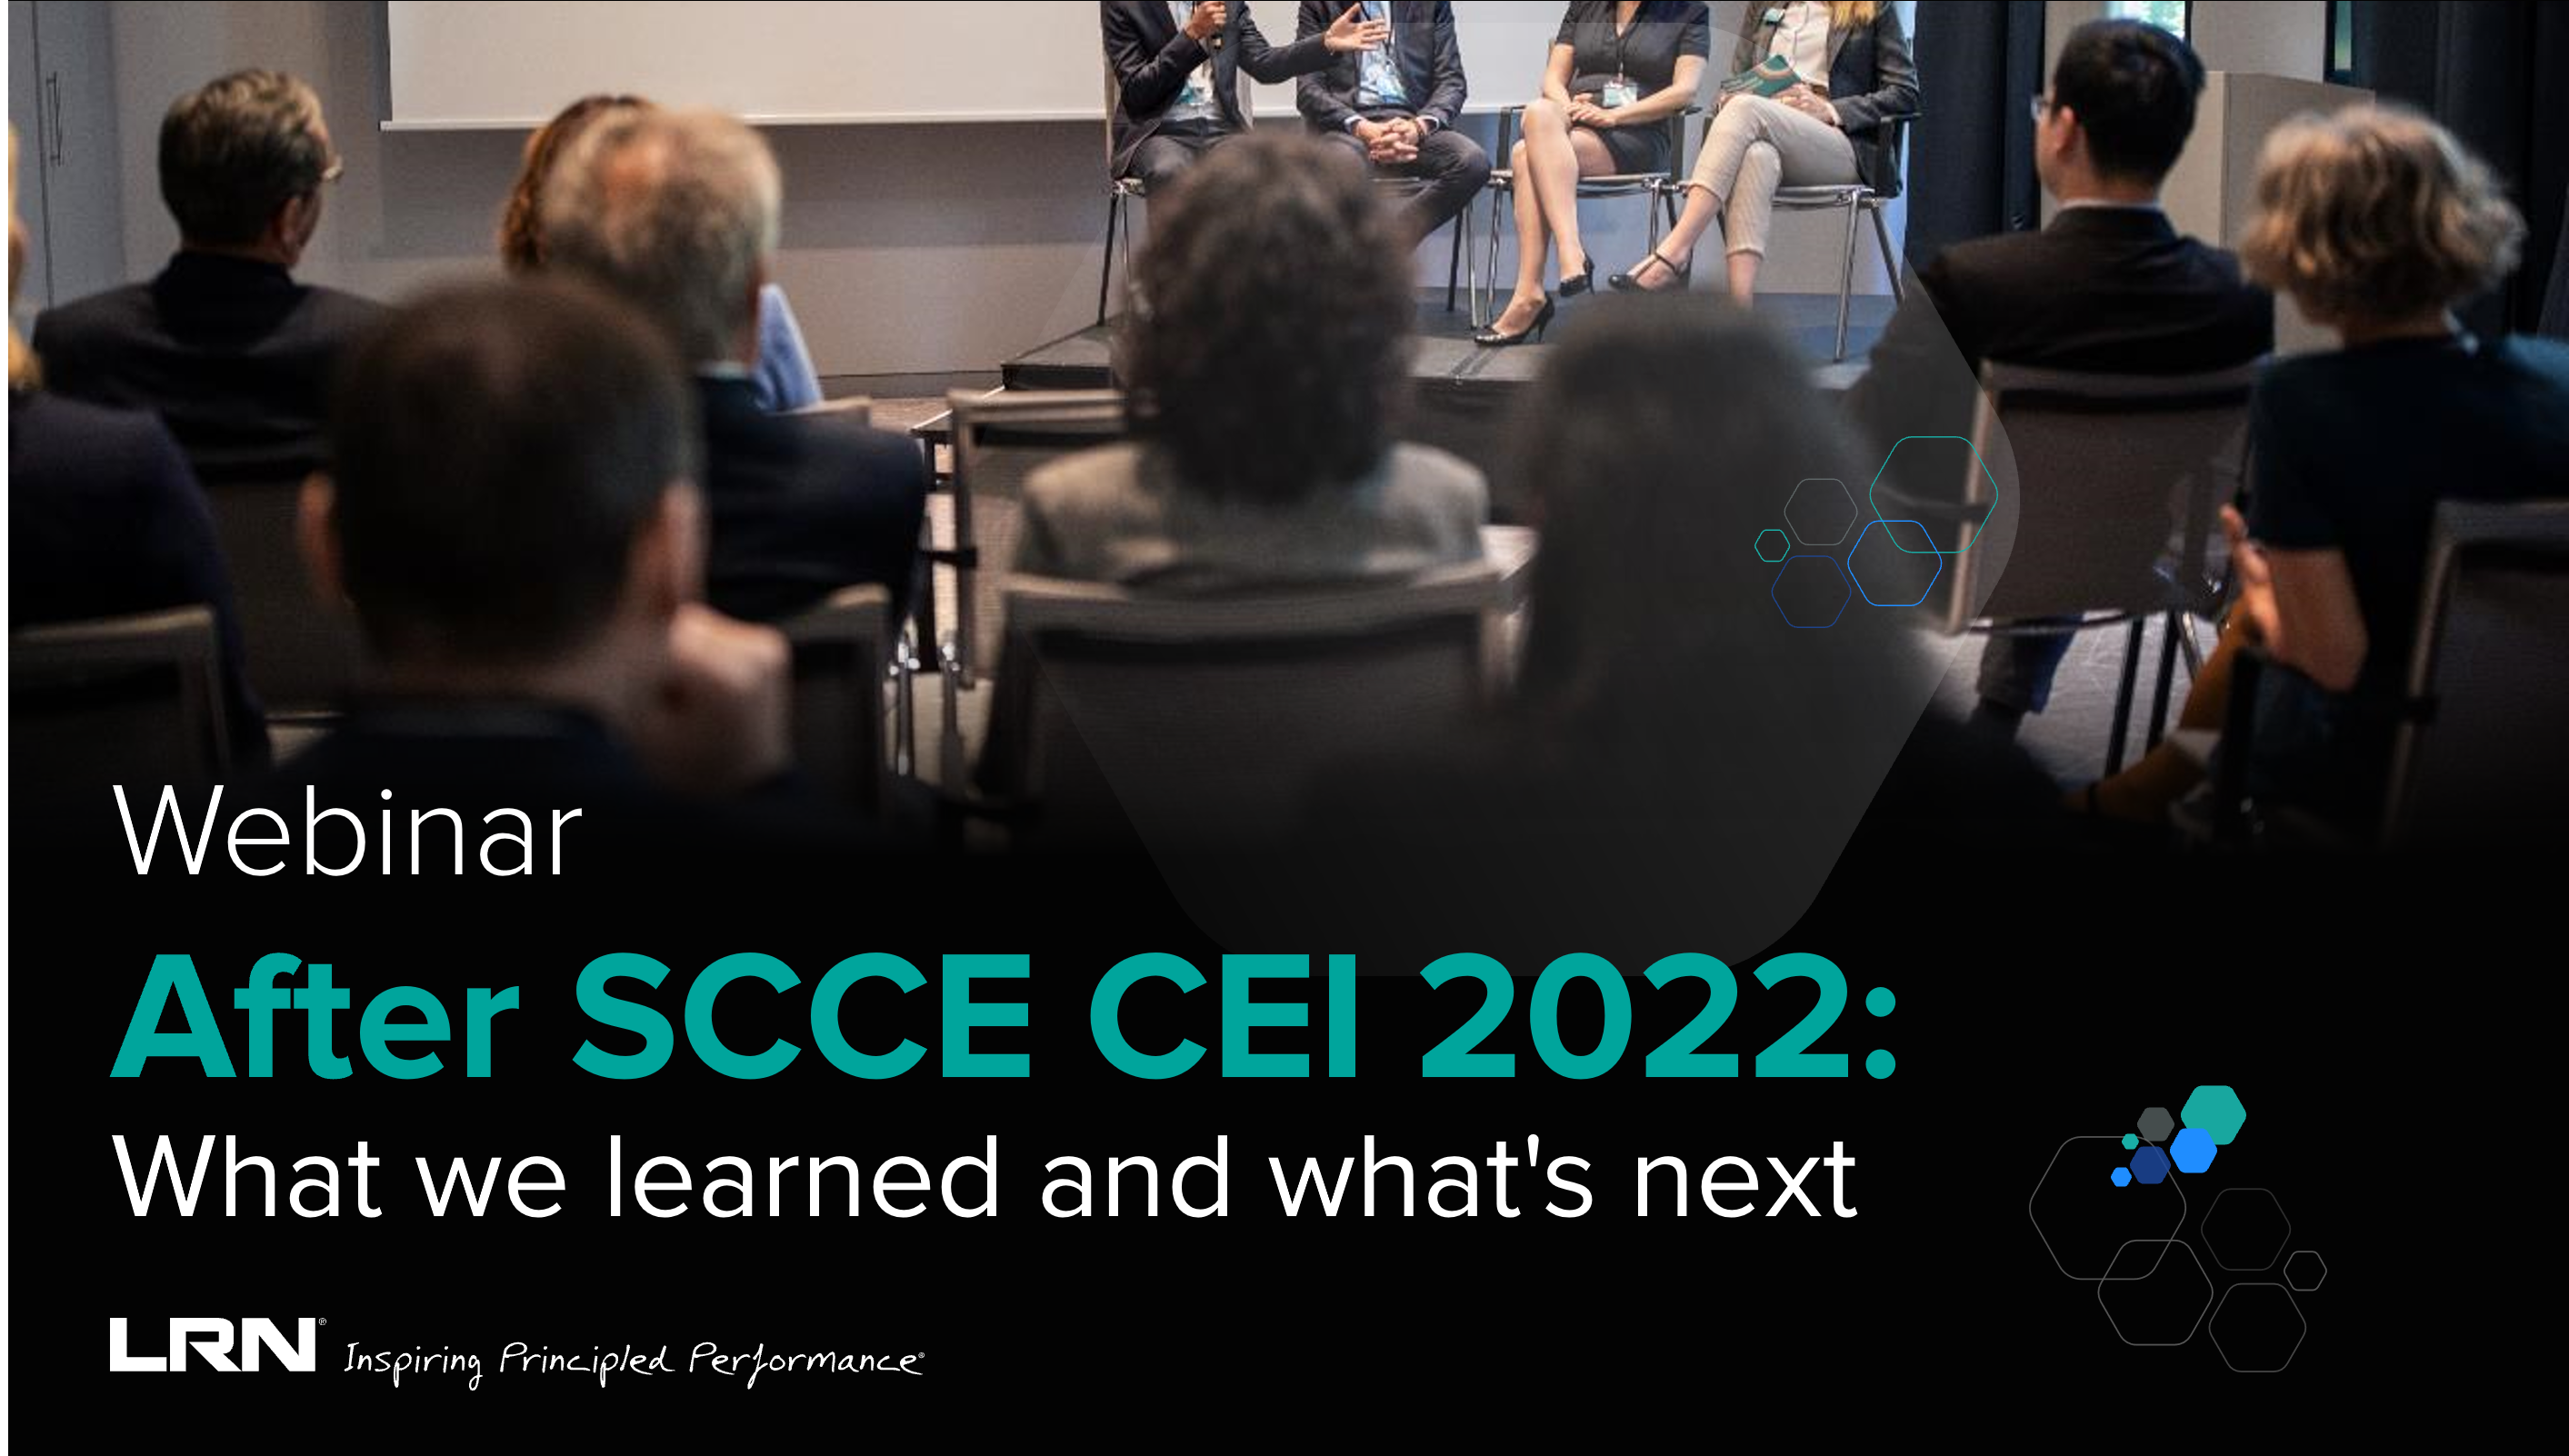 After SCCE CEI 2022: What we learned, and what's next?